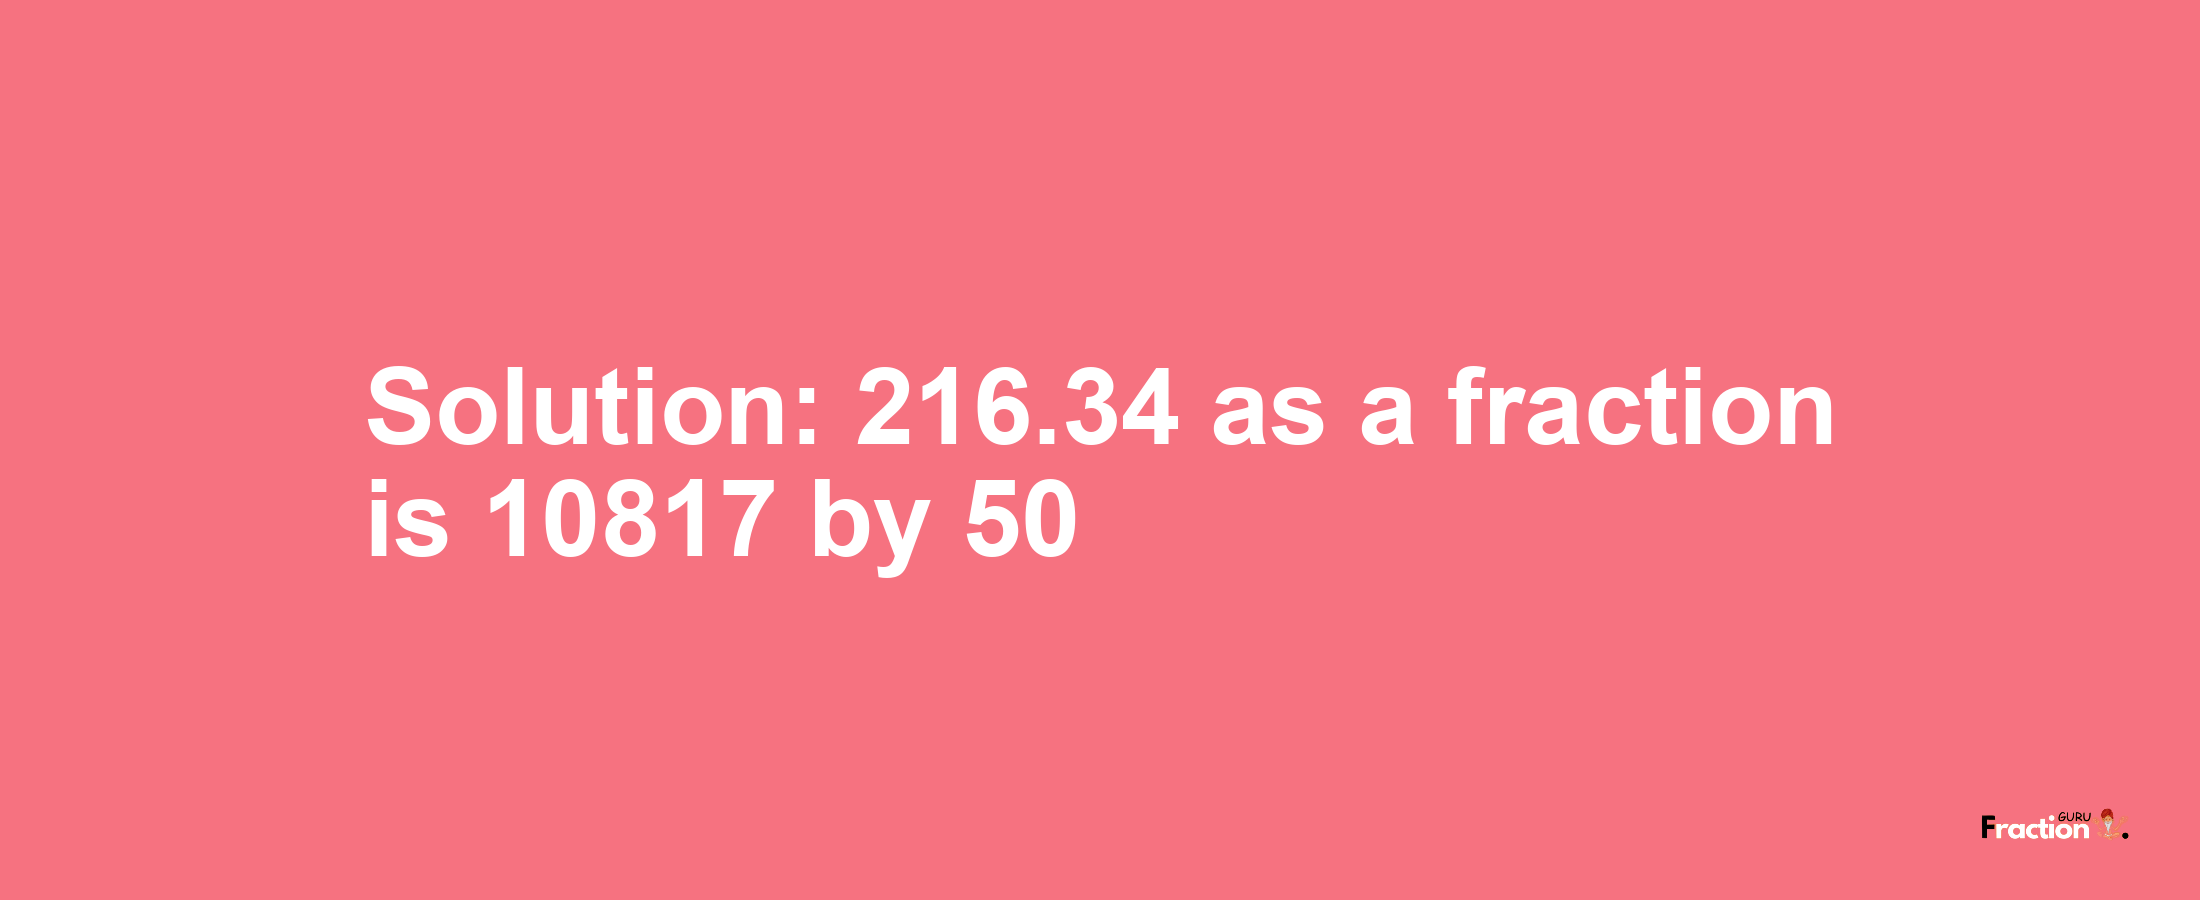 Solution:216.34 as a fraction is 10817/50